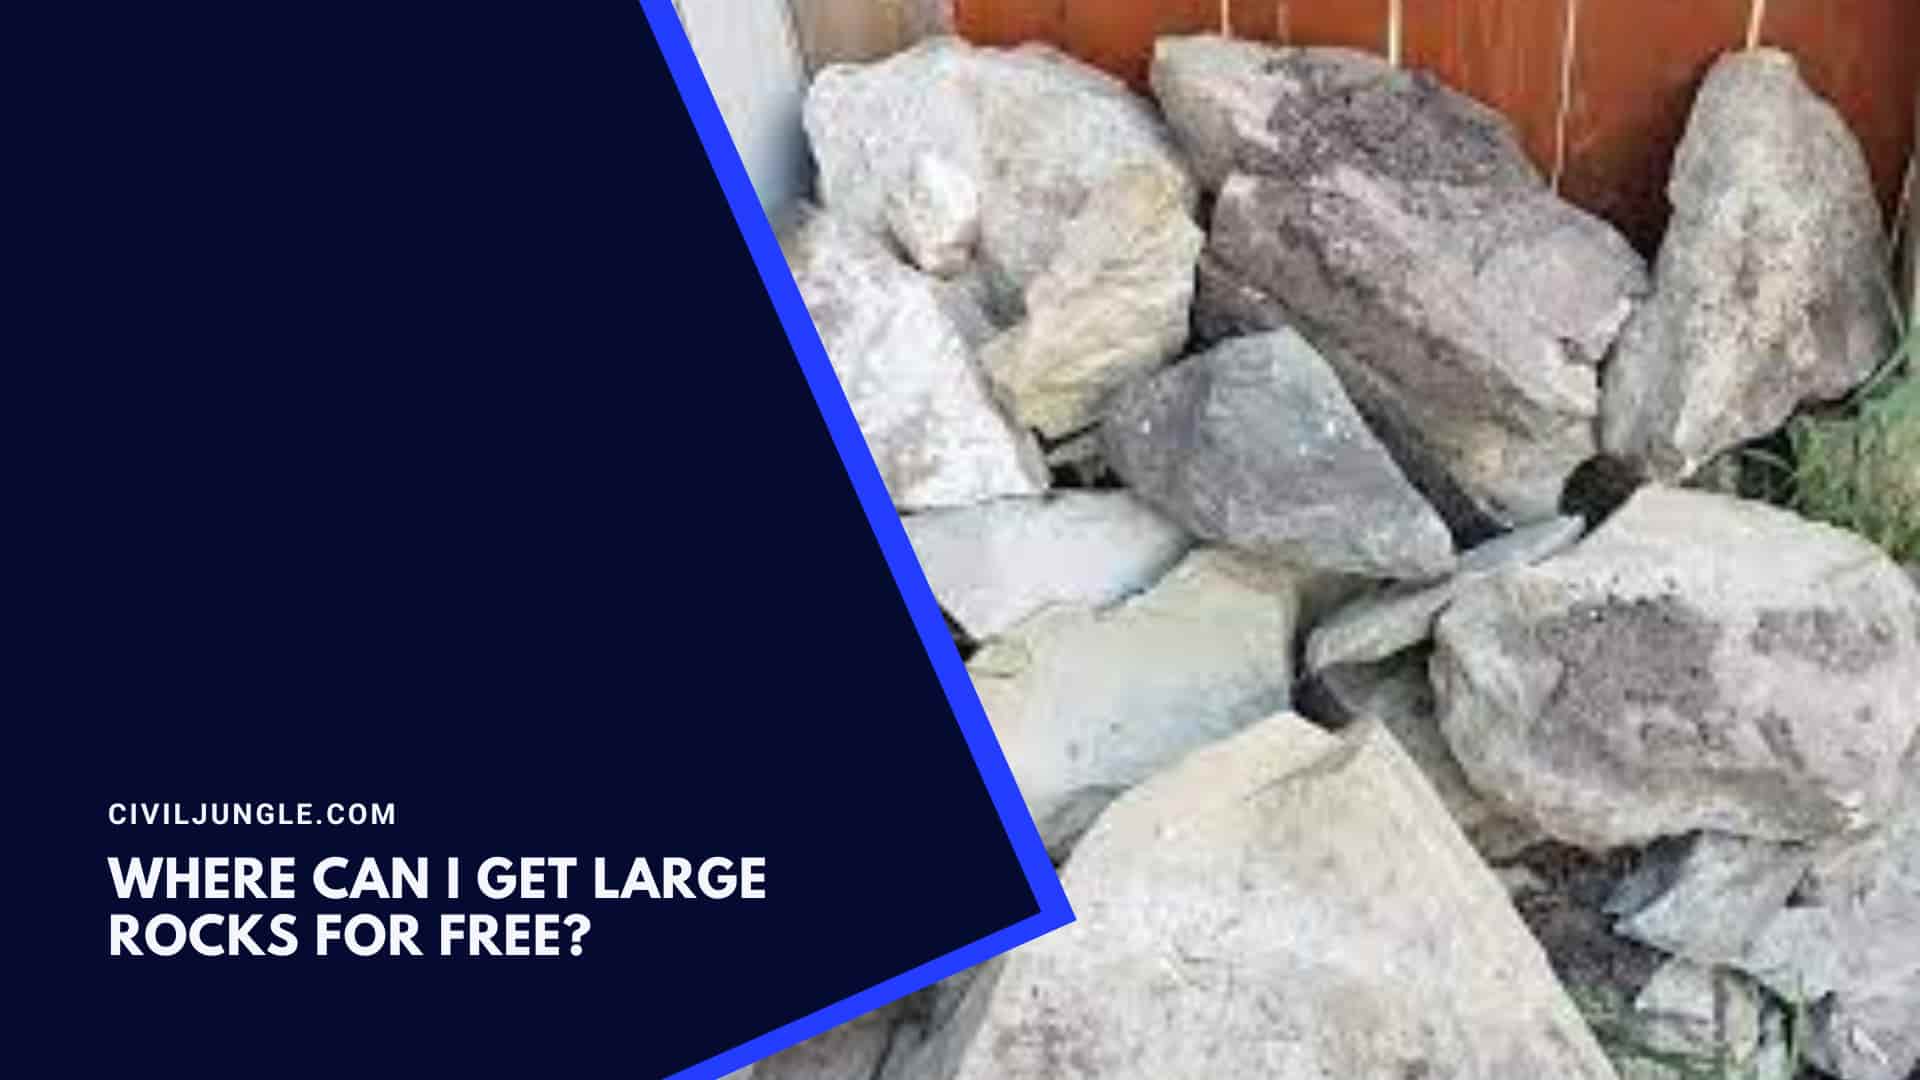 Where Can I Get Large Rocks for Free?